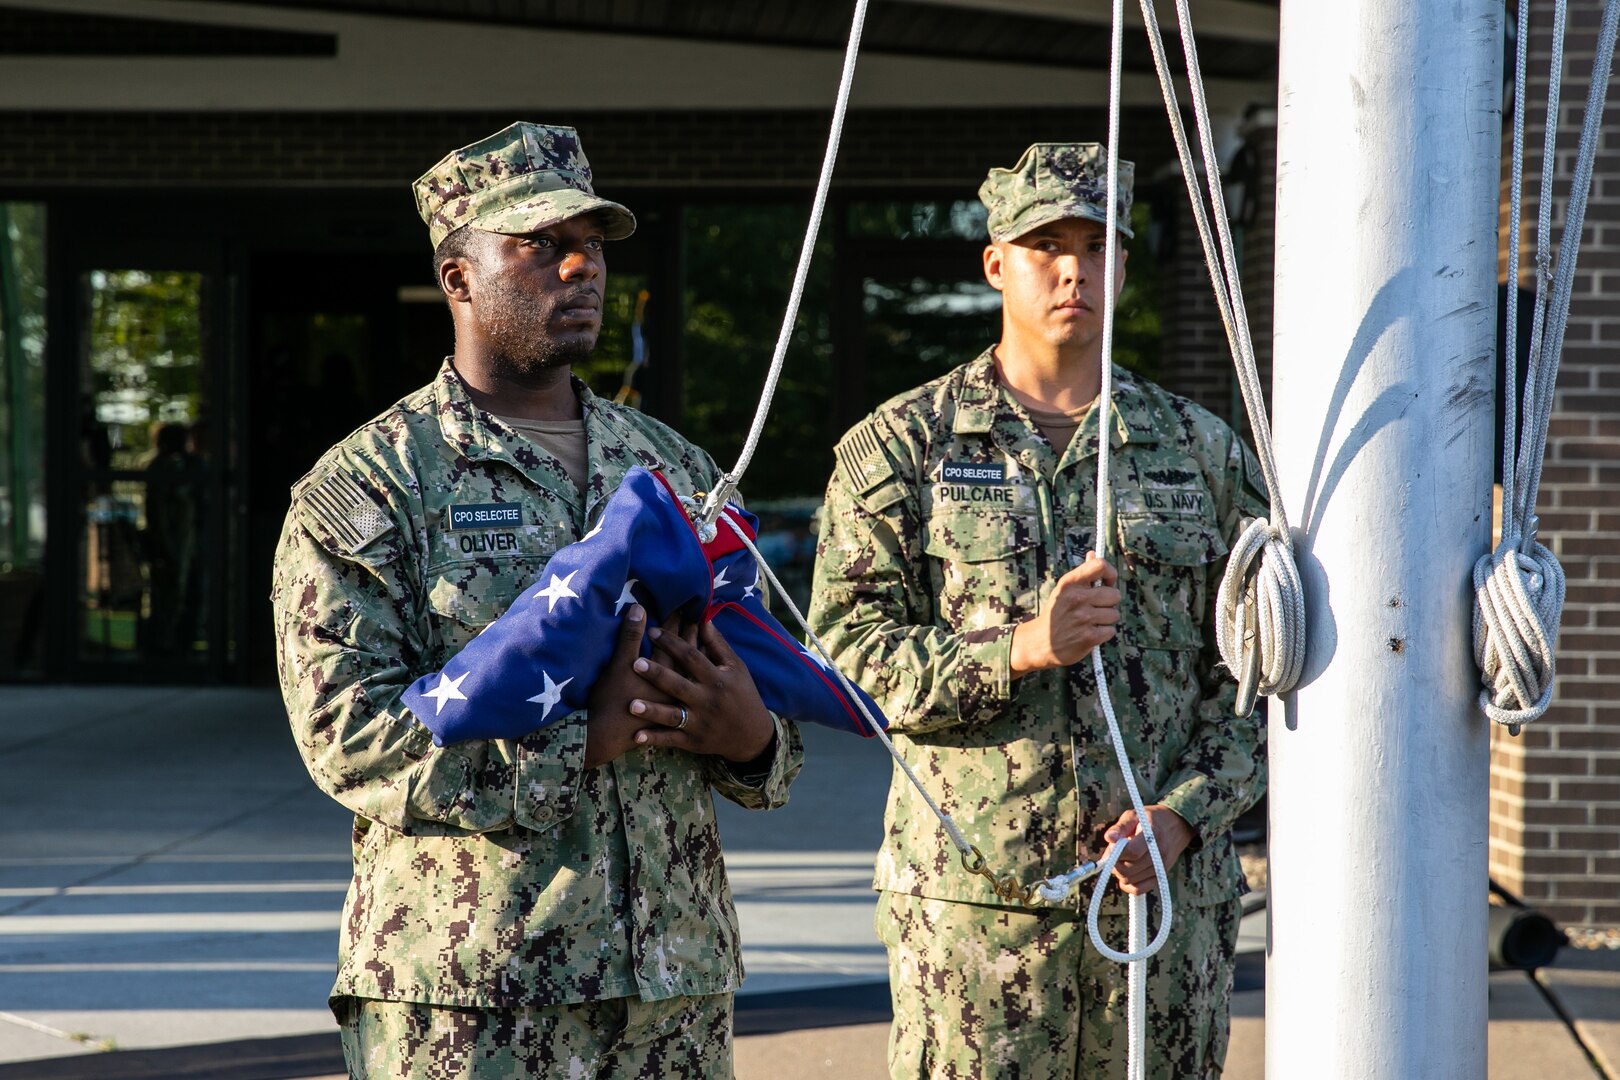 Chief Selects Deshawn Oliver and Nathaniel Pulcar prepare to raise the National Ensign during a Patriots Day ceremony at Norfolk Naval Shipyard Sept. 11, 2019.